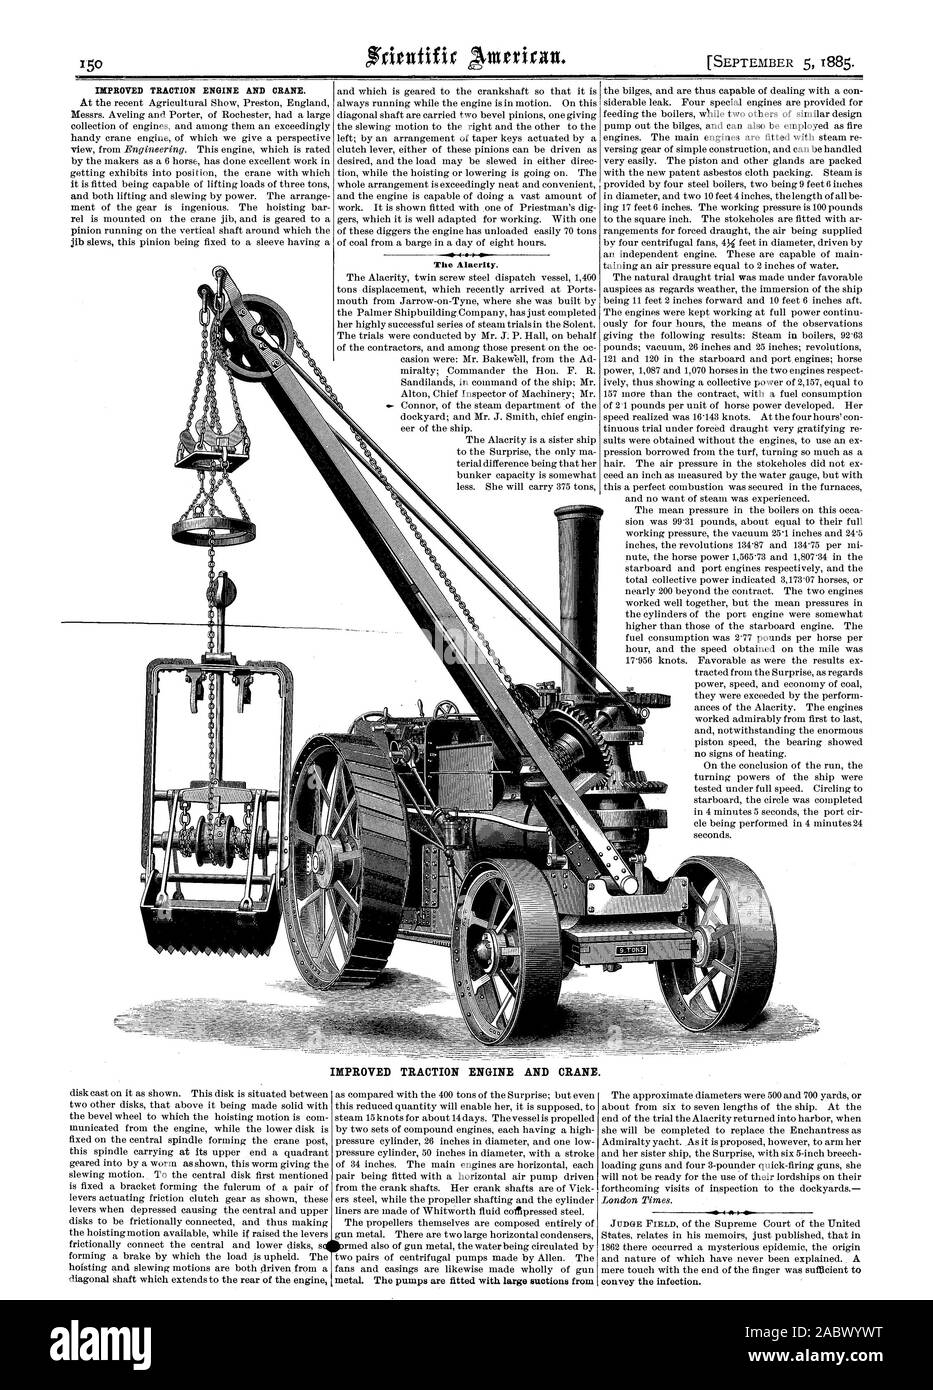 IMPROVED TRACTION ENGINE AND CRANE. The Alacrity. IMPROVED TRACTION ENGINE AND CRANE., scientific american, 1885-09-05 Stock Photo